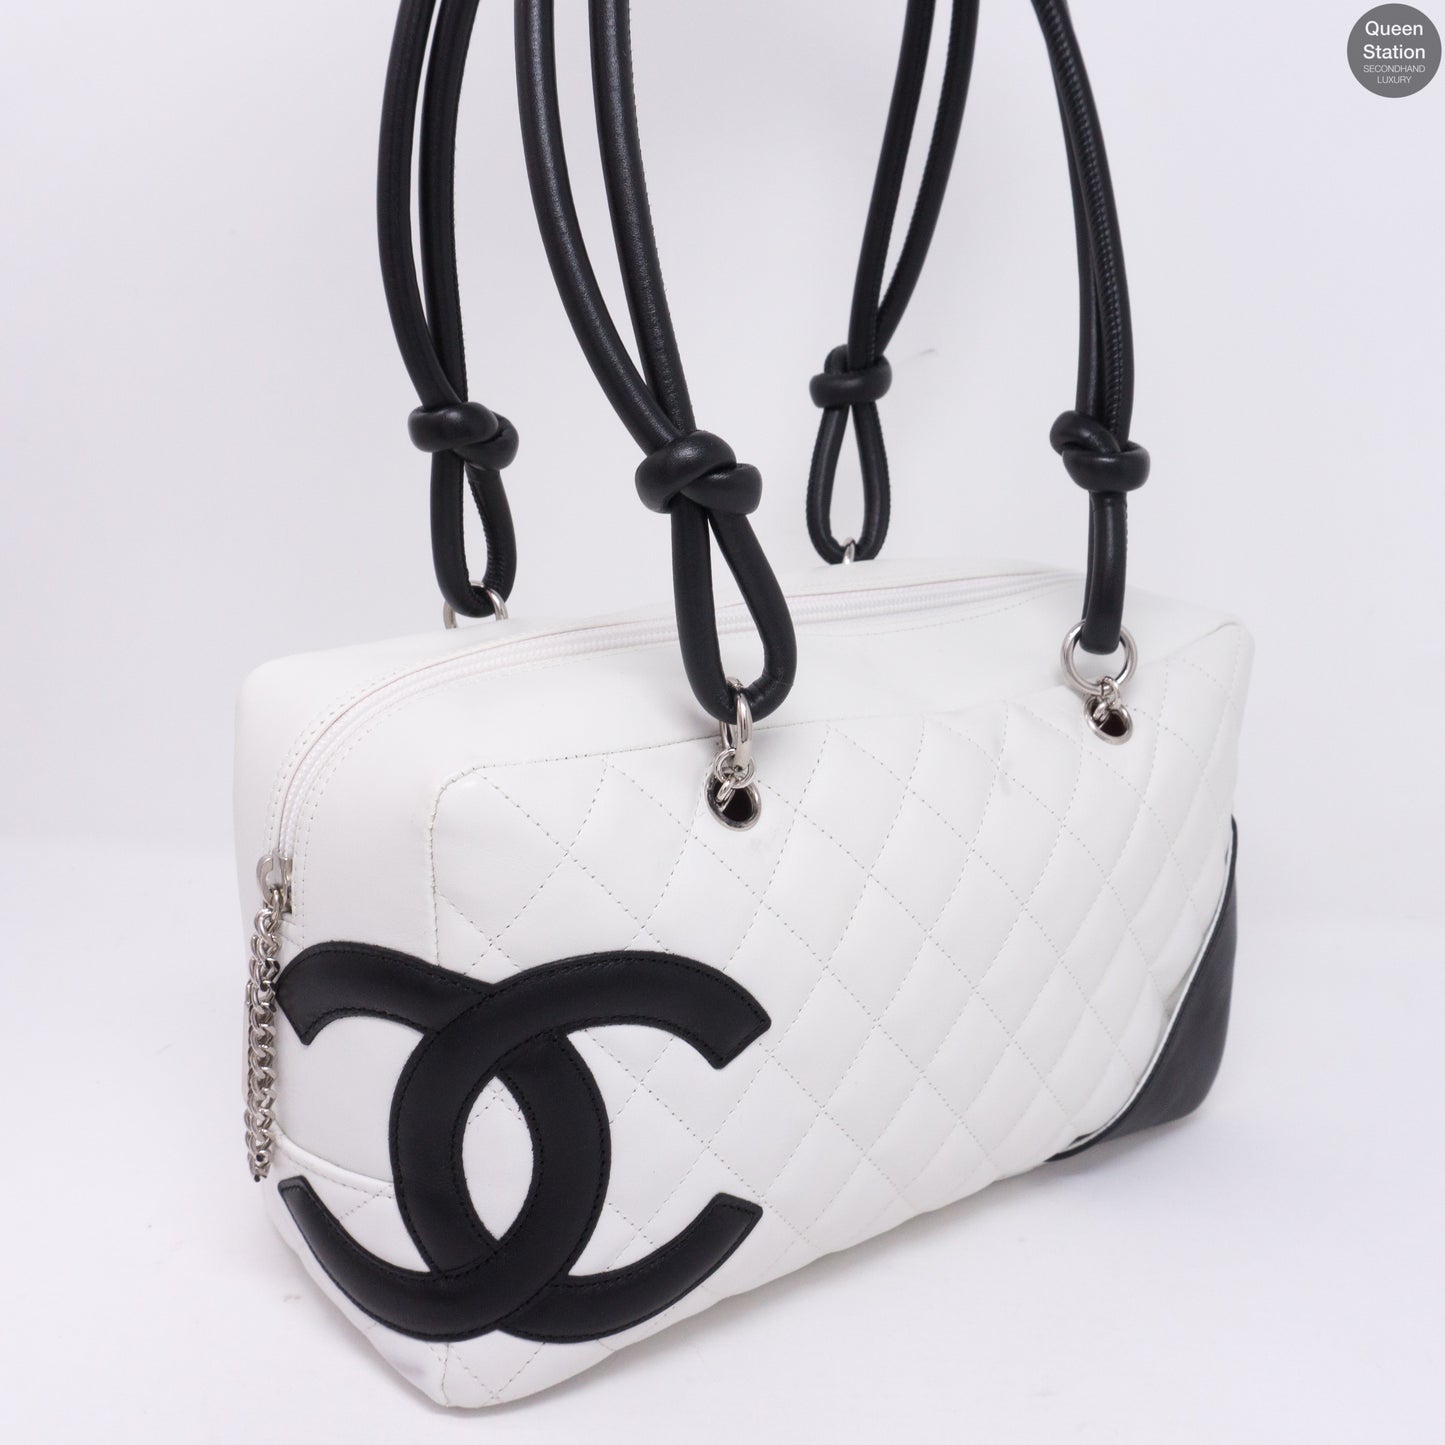 Cambon Bowler Quilted Leather White